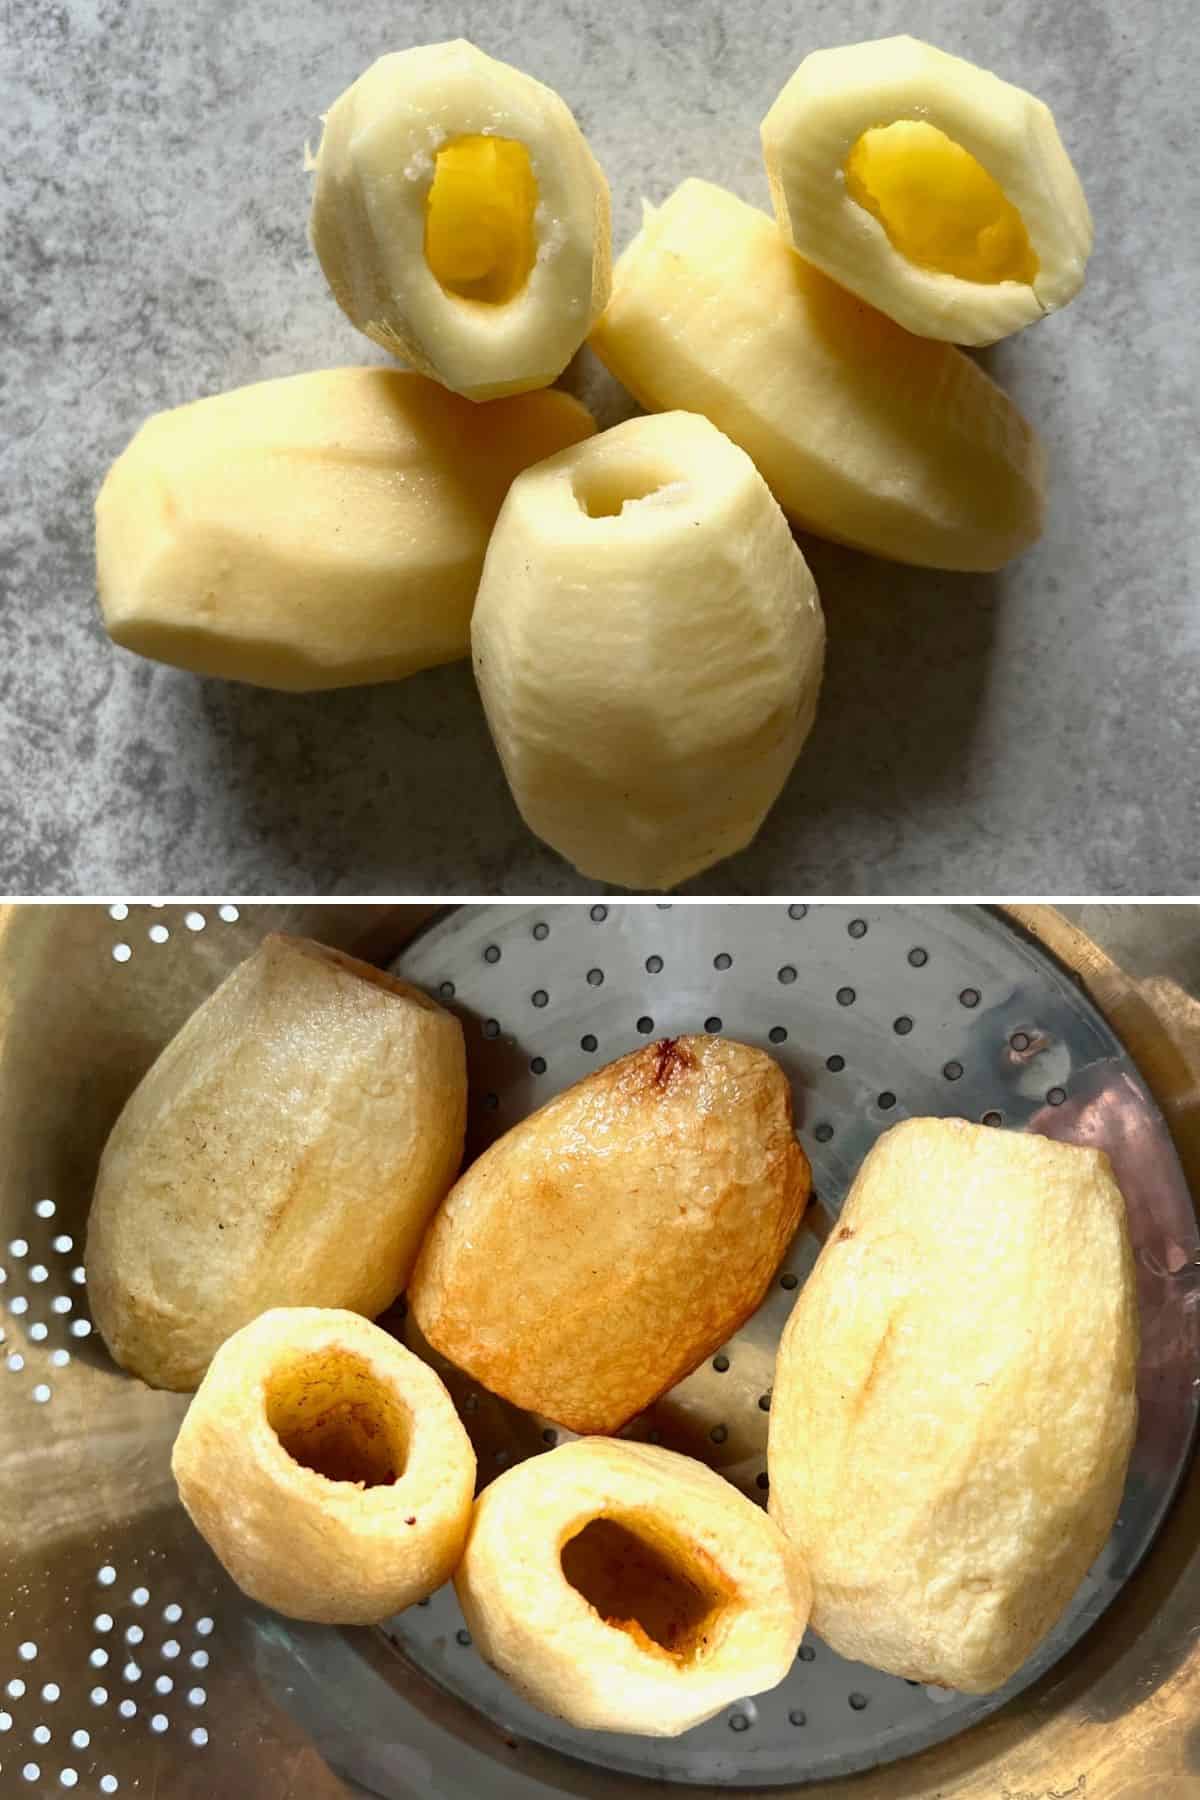 Steps for cooking peeled potatoes